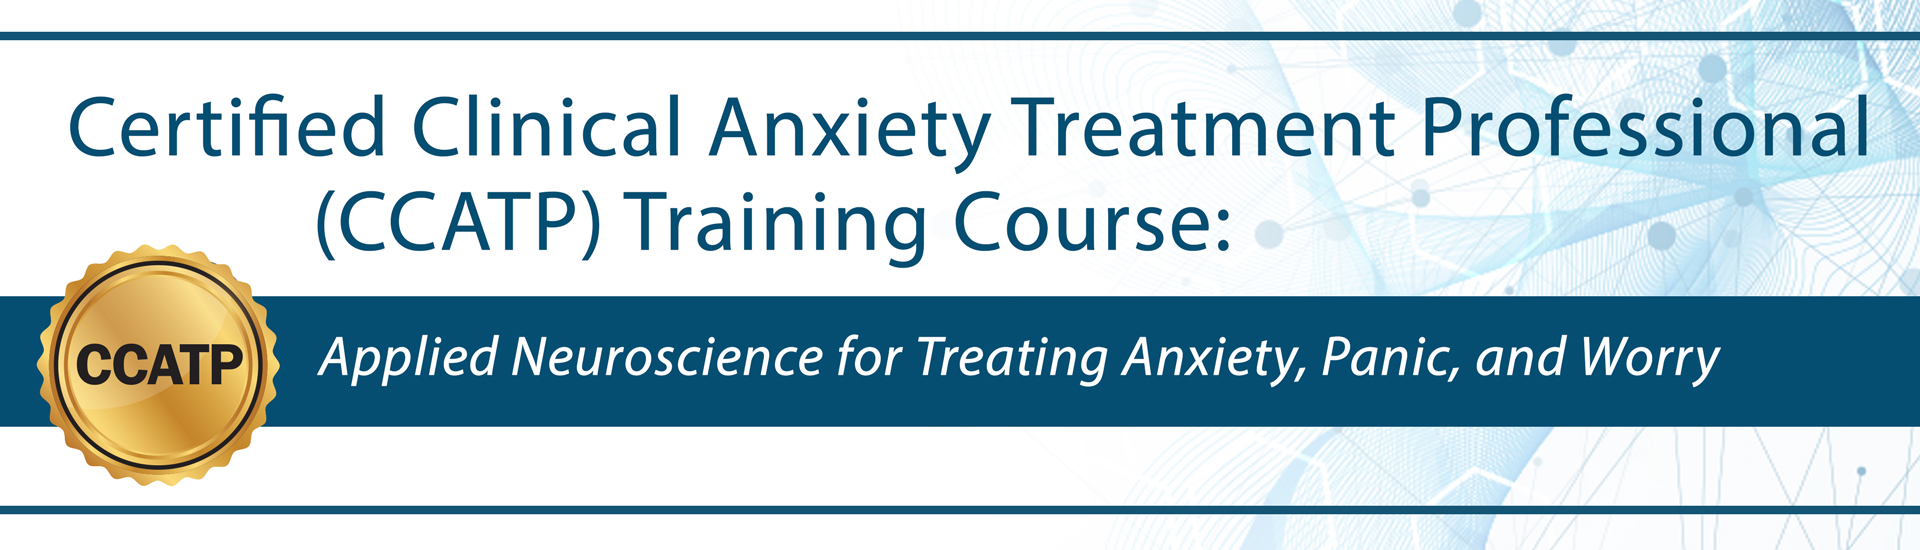 Certified Clinical Anxiety Treatment Professional (CCATP) Training Course